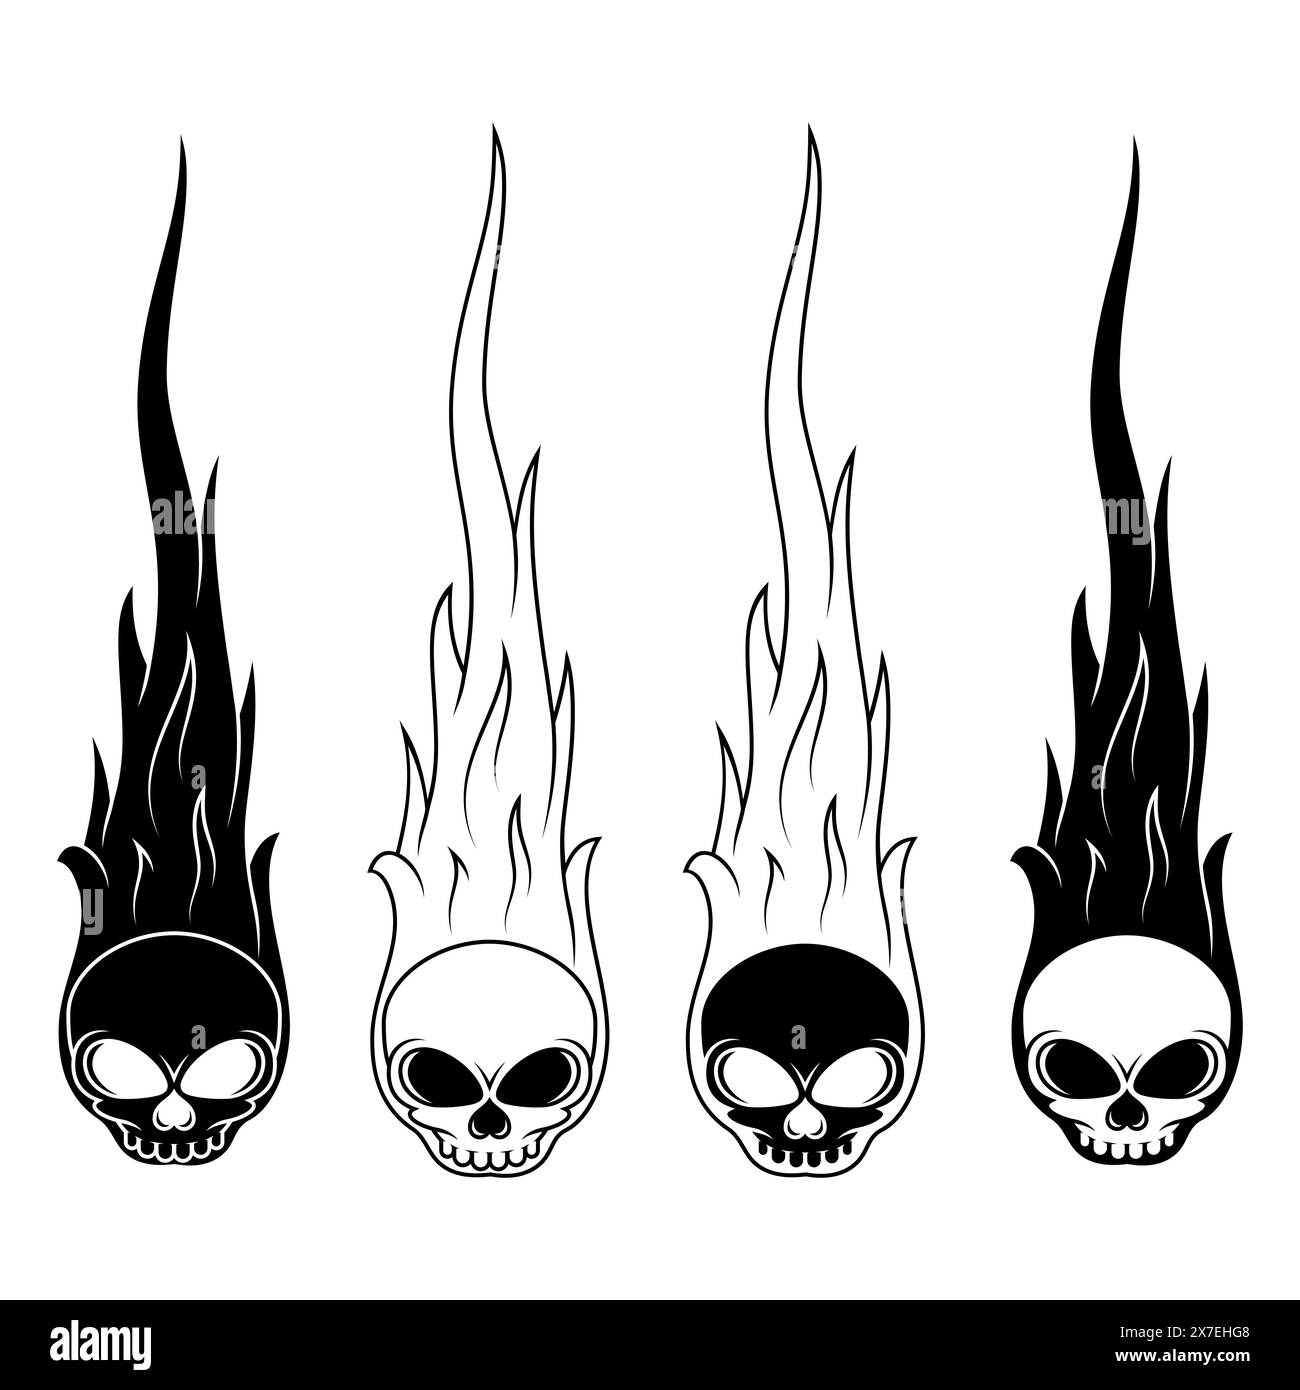 Skull vector design in cartoon style engulfed in fire Stock Vector